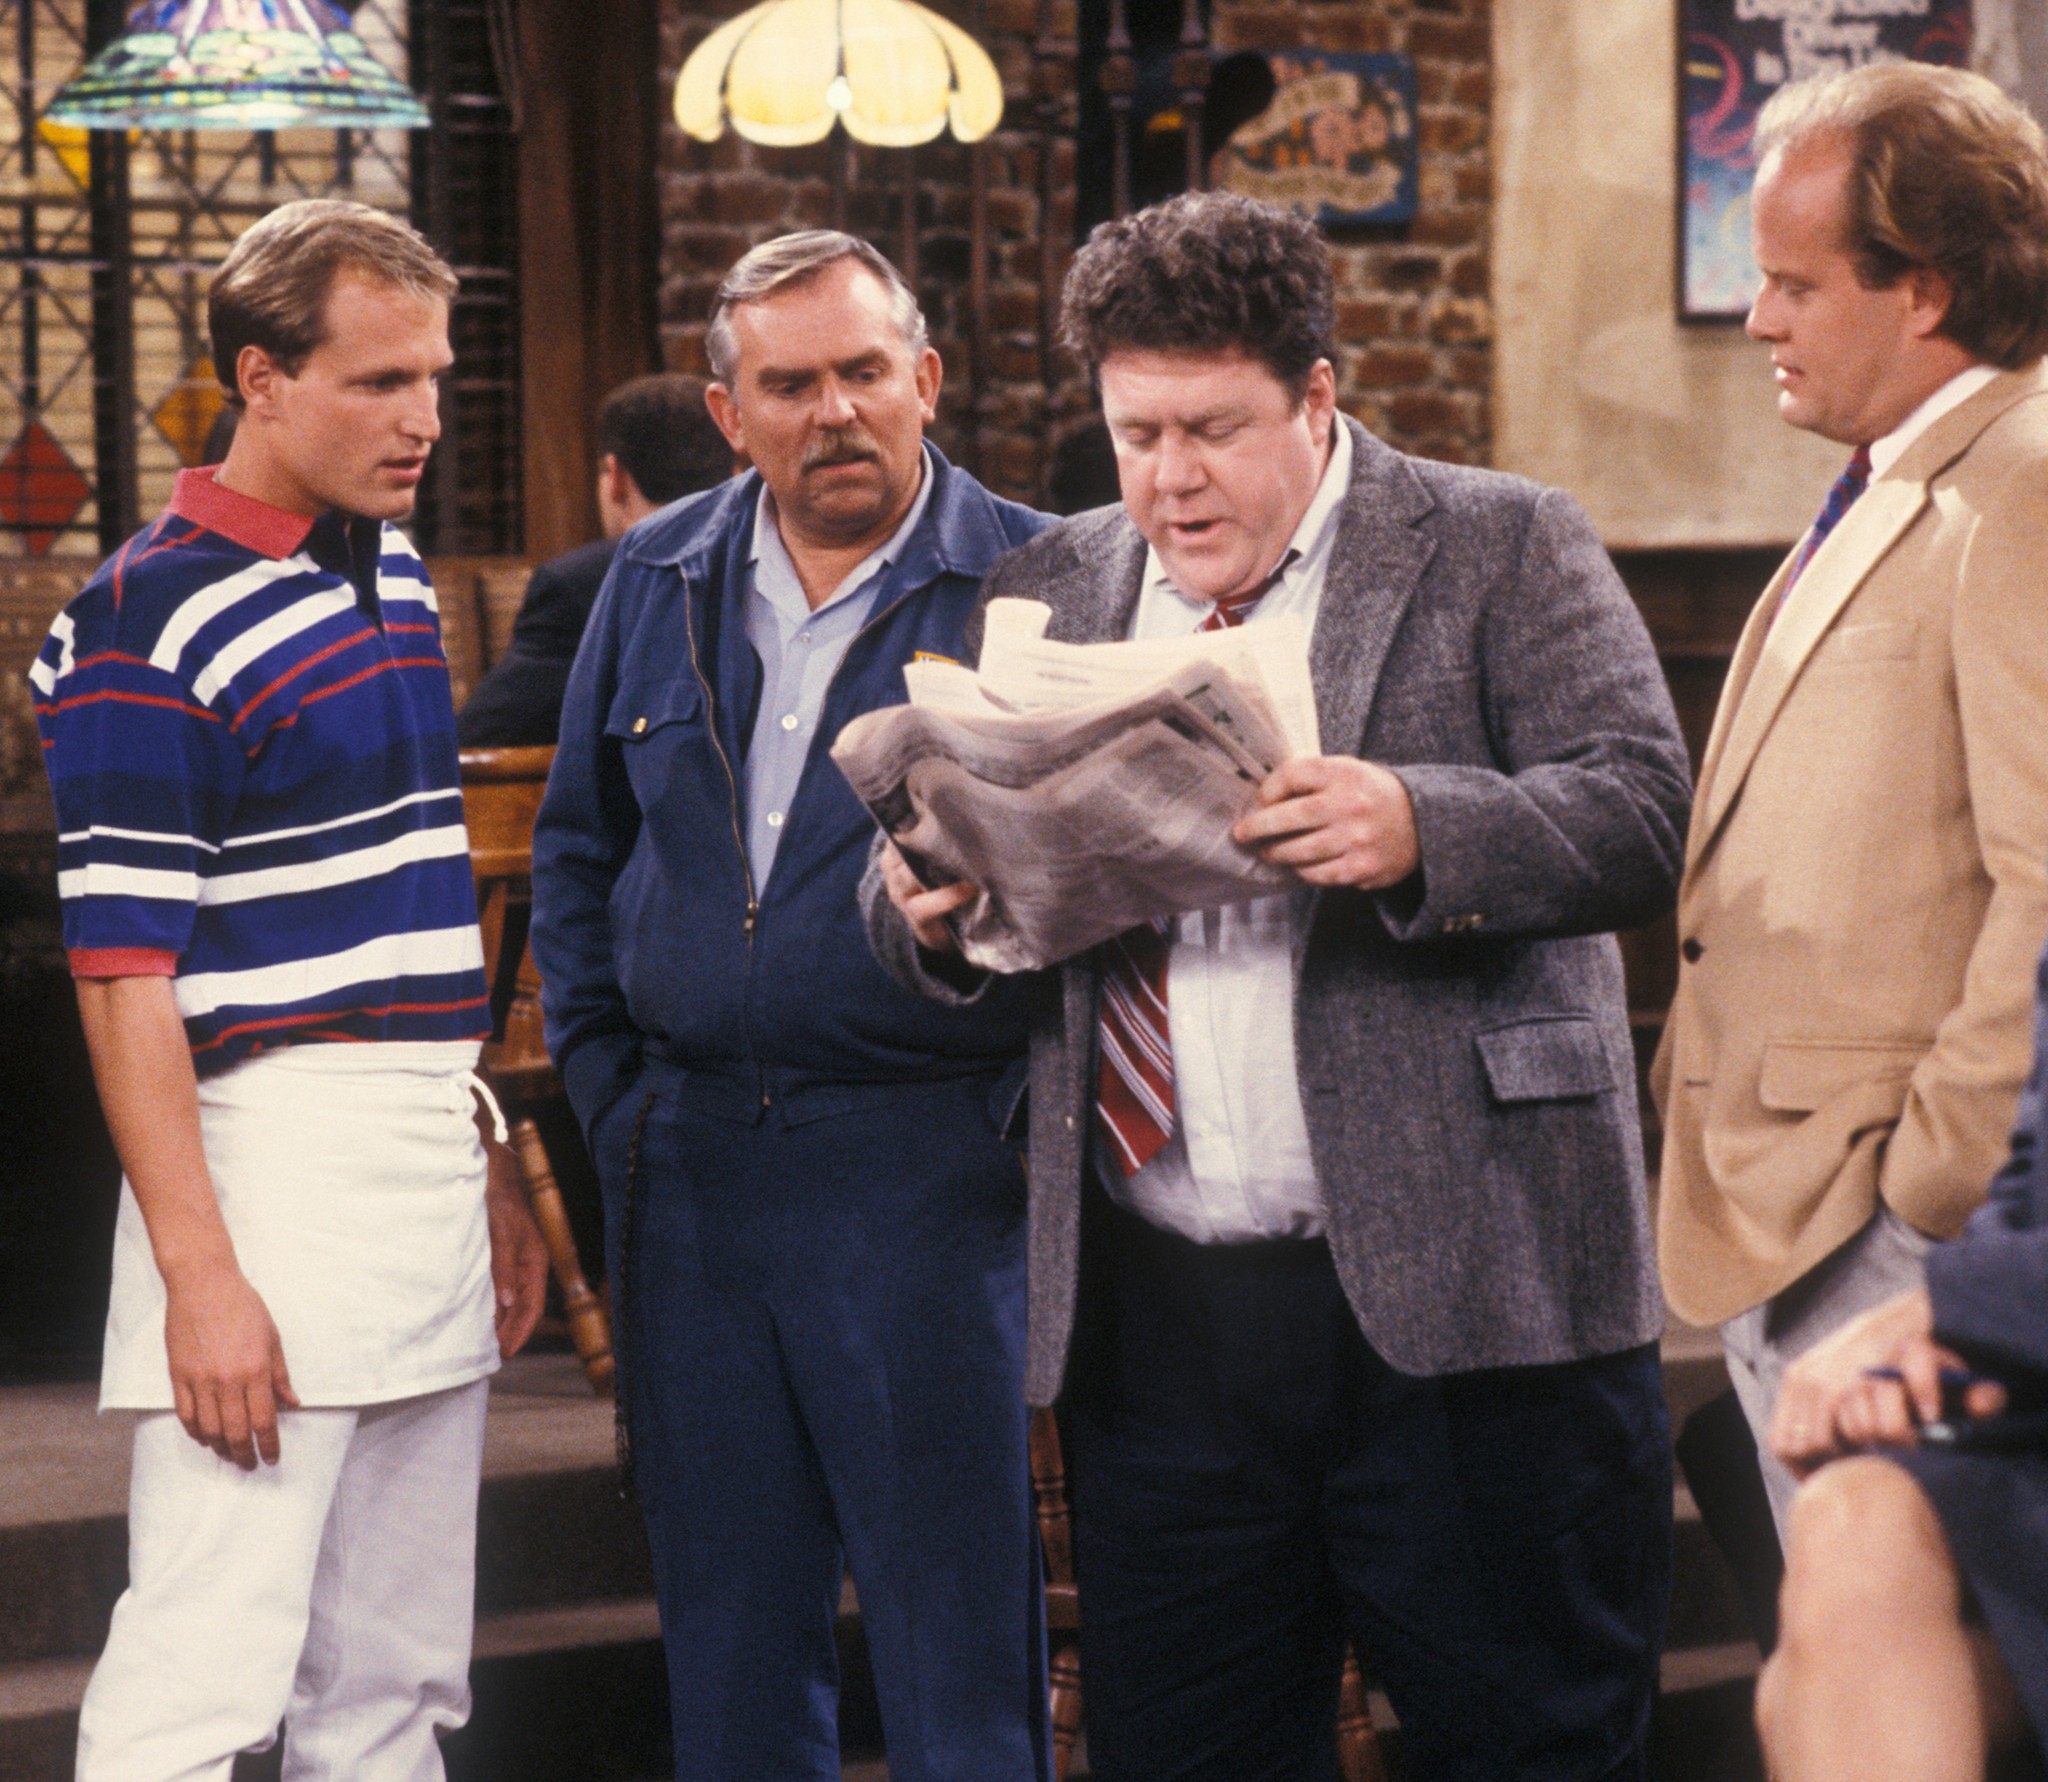 Still of Woody Harrelson, Kelsey Grammer, John Ratzenberger and George Wendt in Cheers (1982)